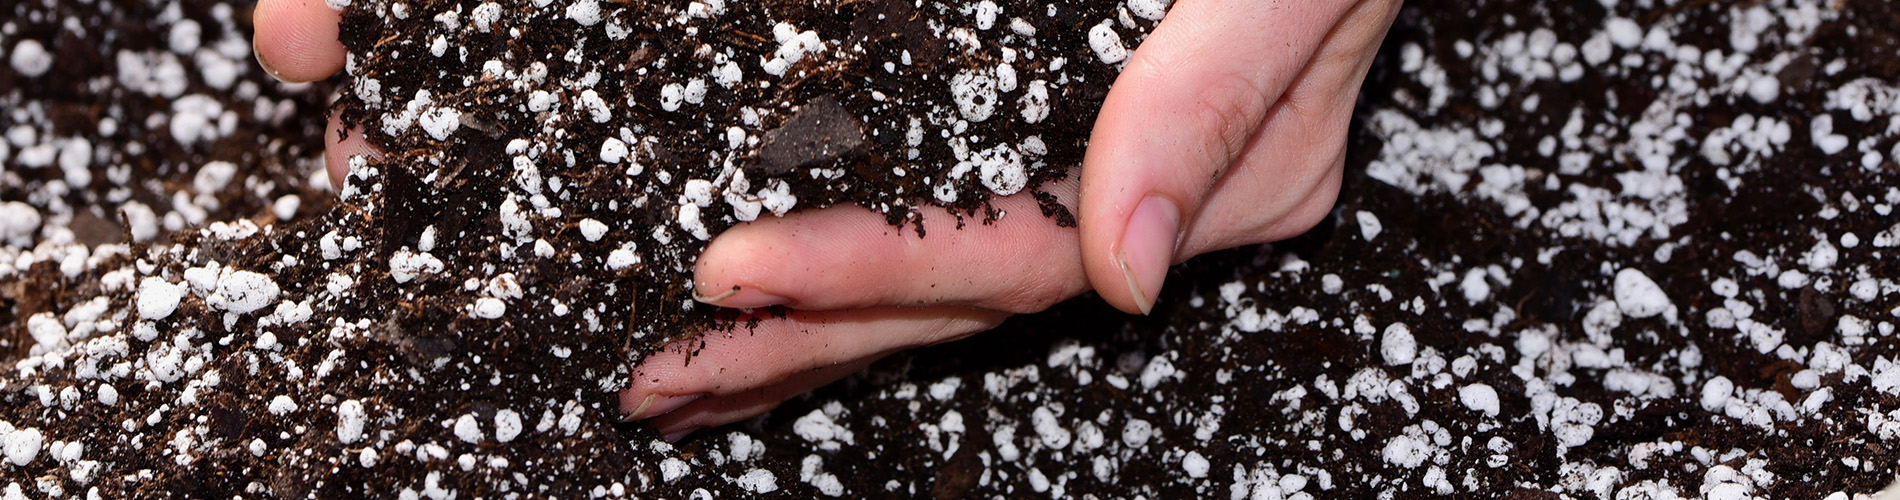 potting soil in hands wetting agents